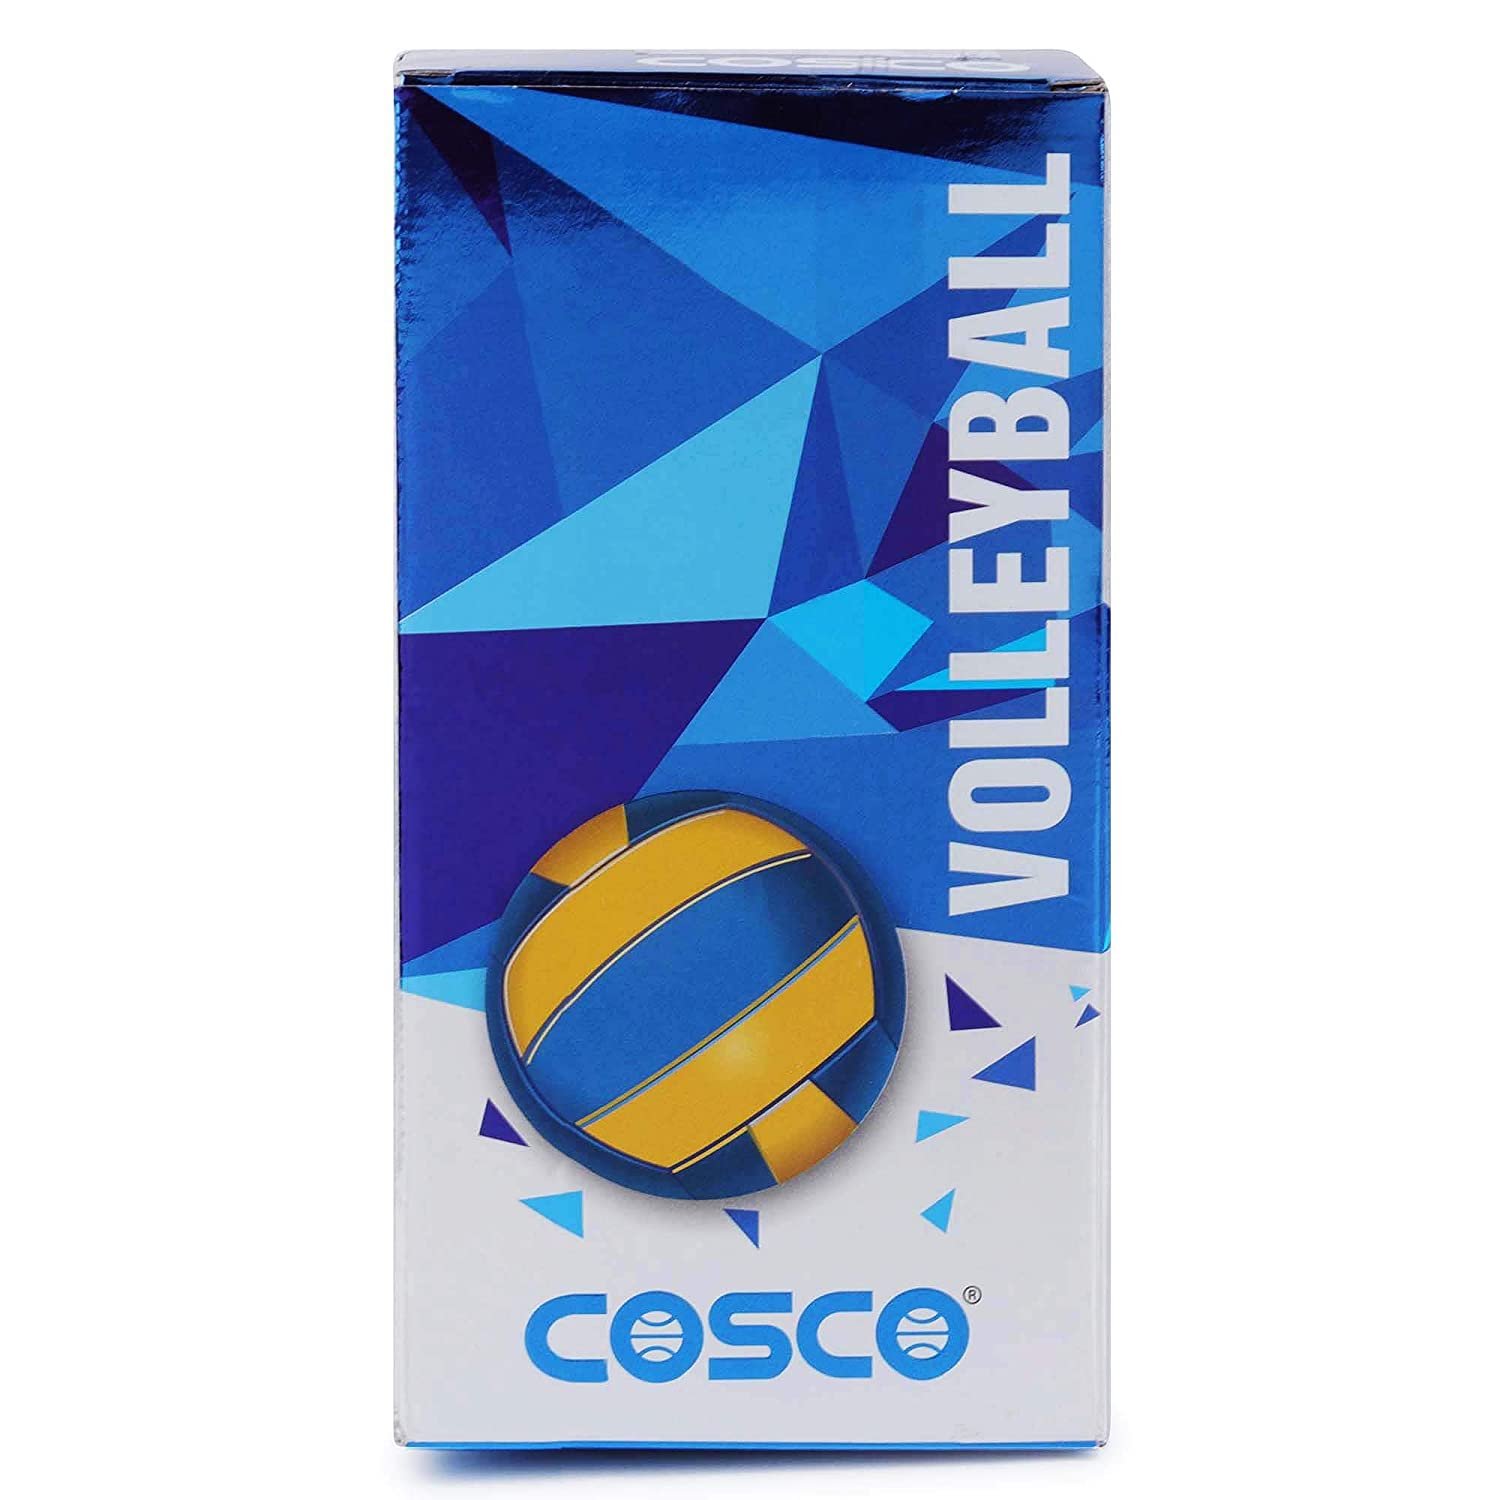 Cosco Champion Volley Ball Size 4 